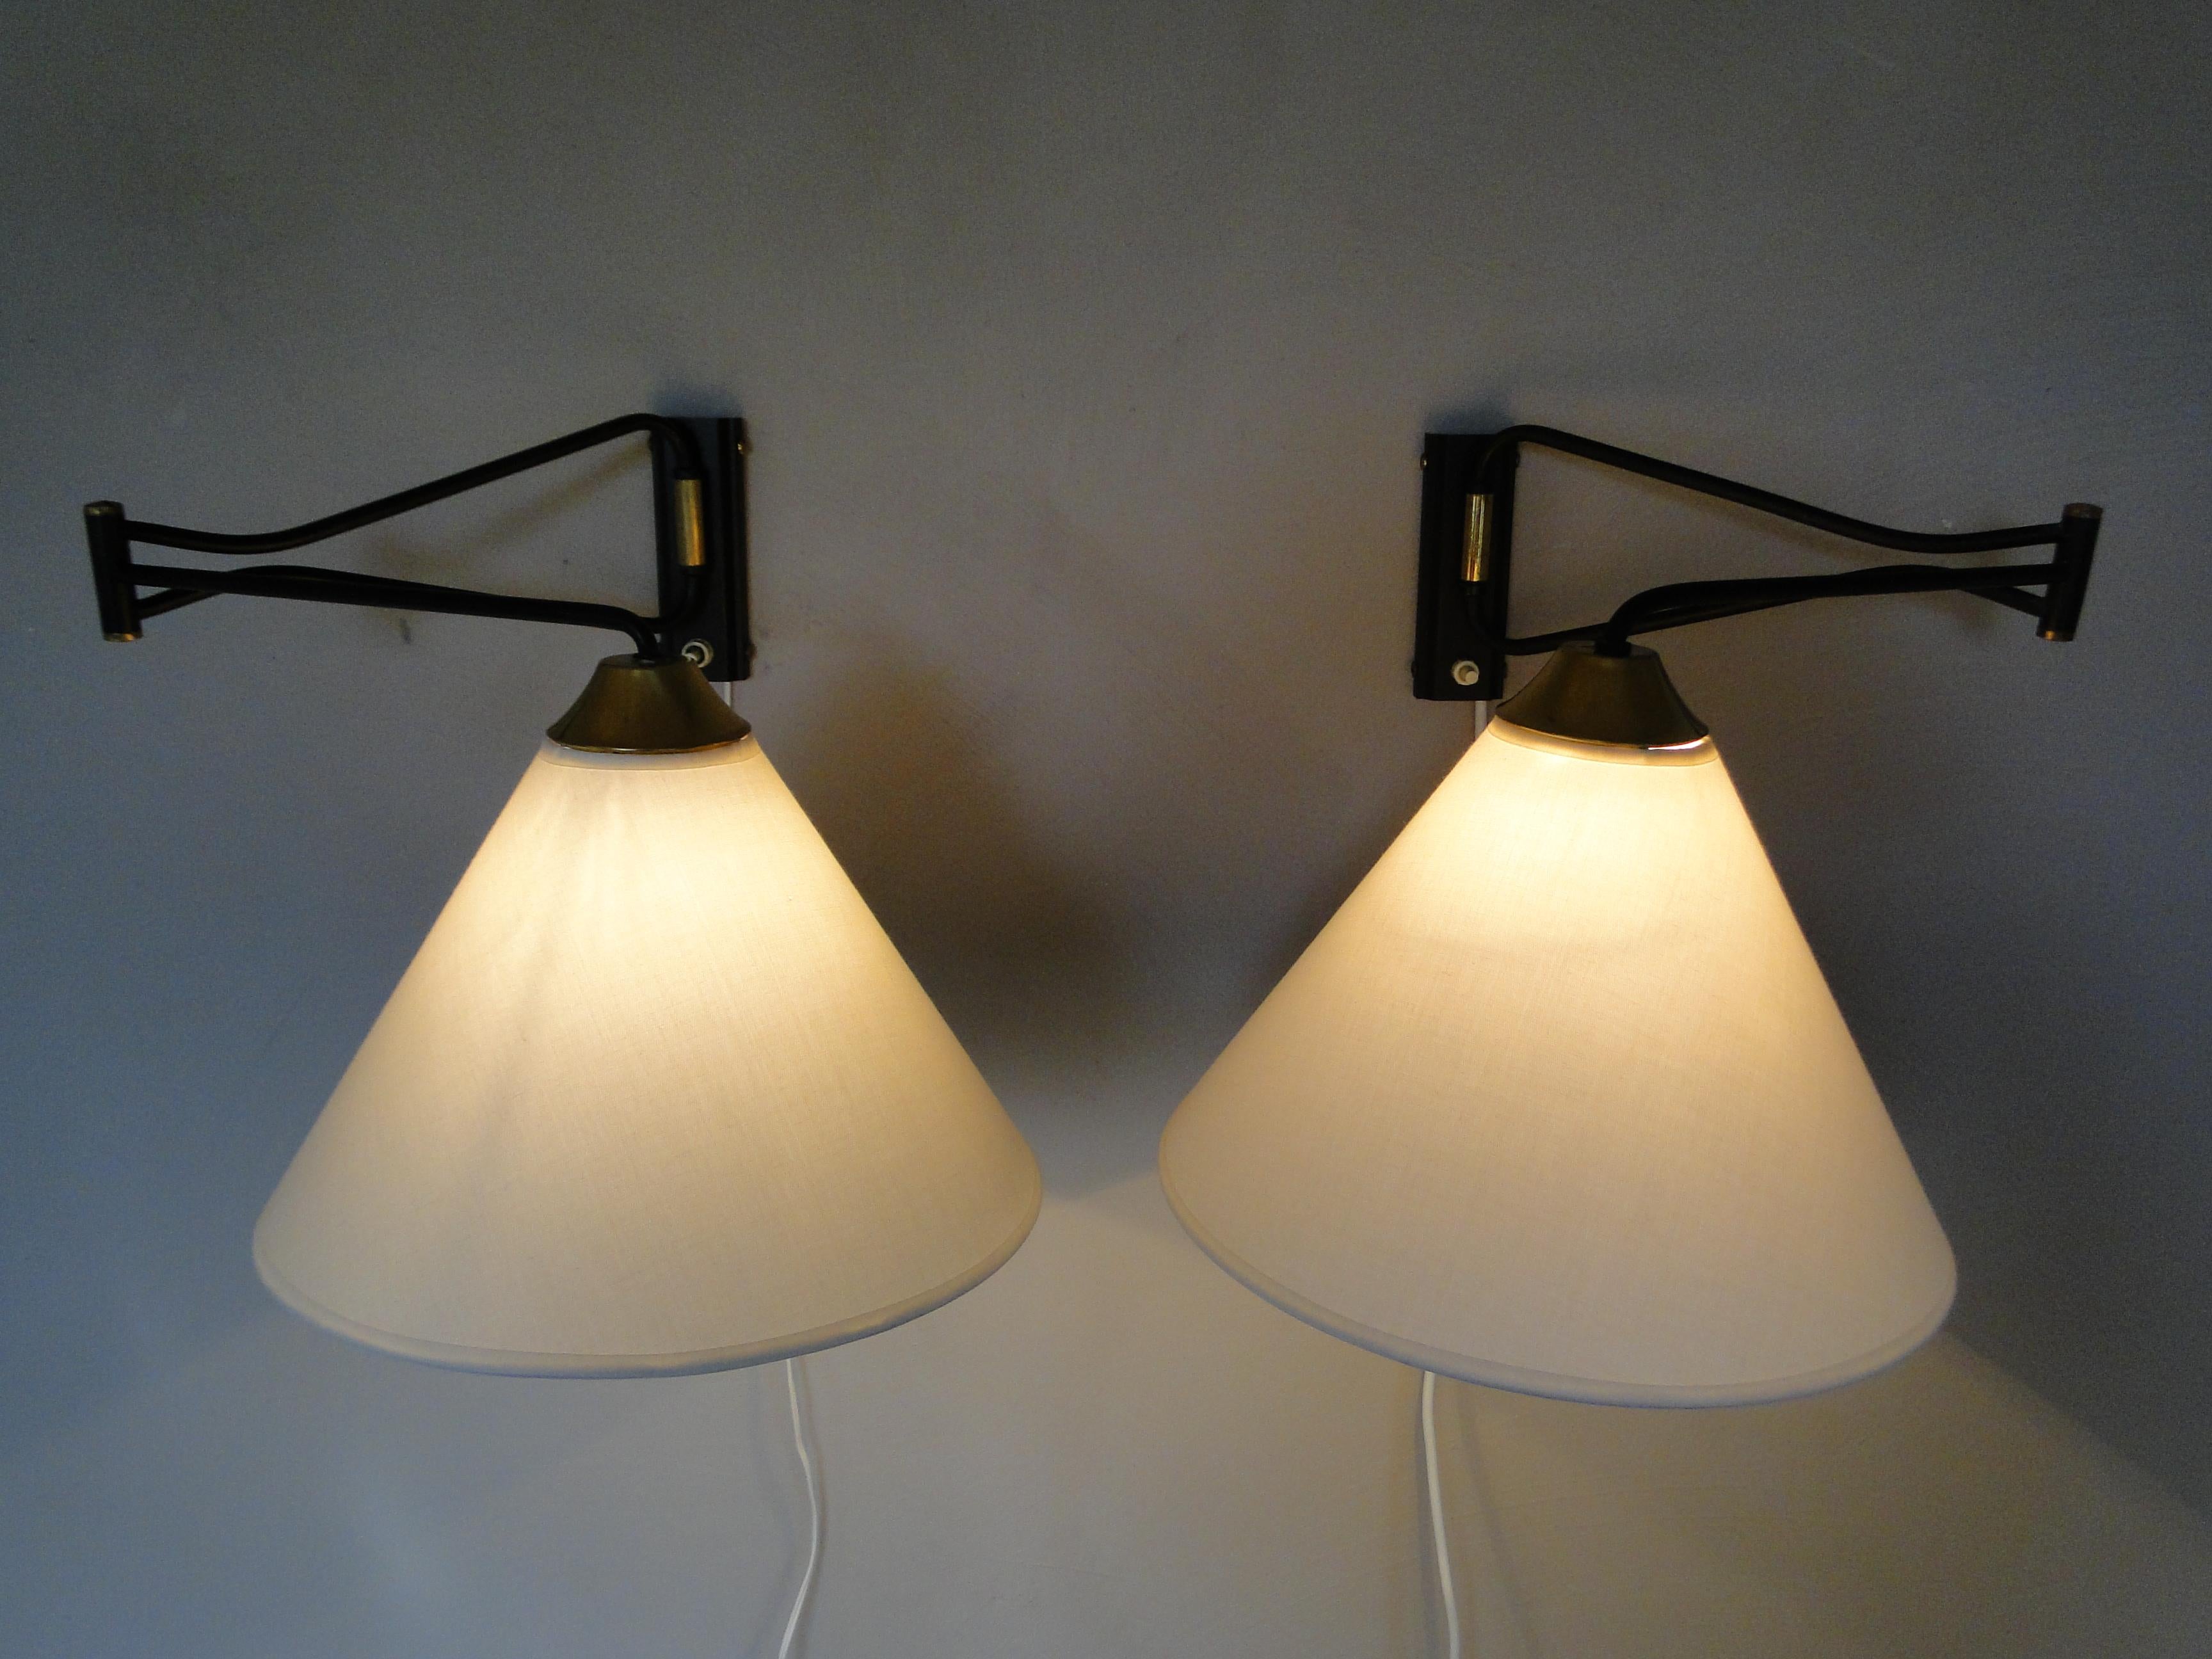  Pair of Rene Mathieu Swing Arm Sconces Wall lamp French Adjustable  Lunel Arlus For Sale 4